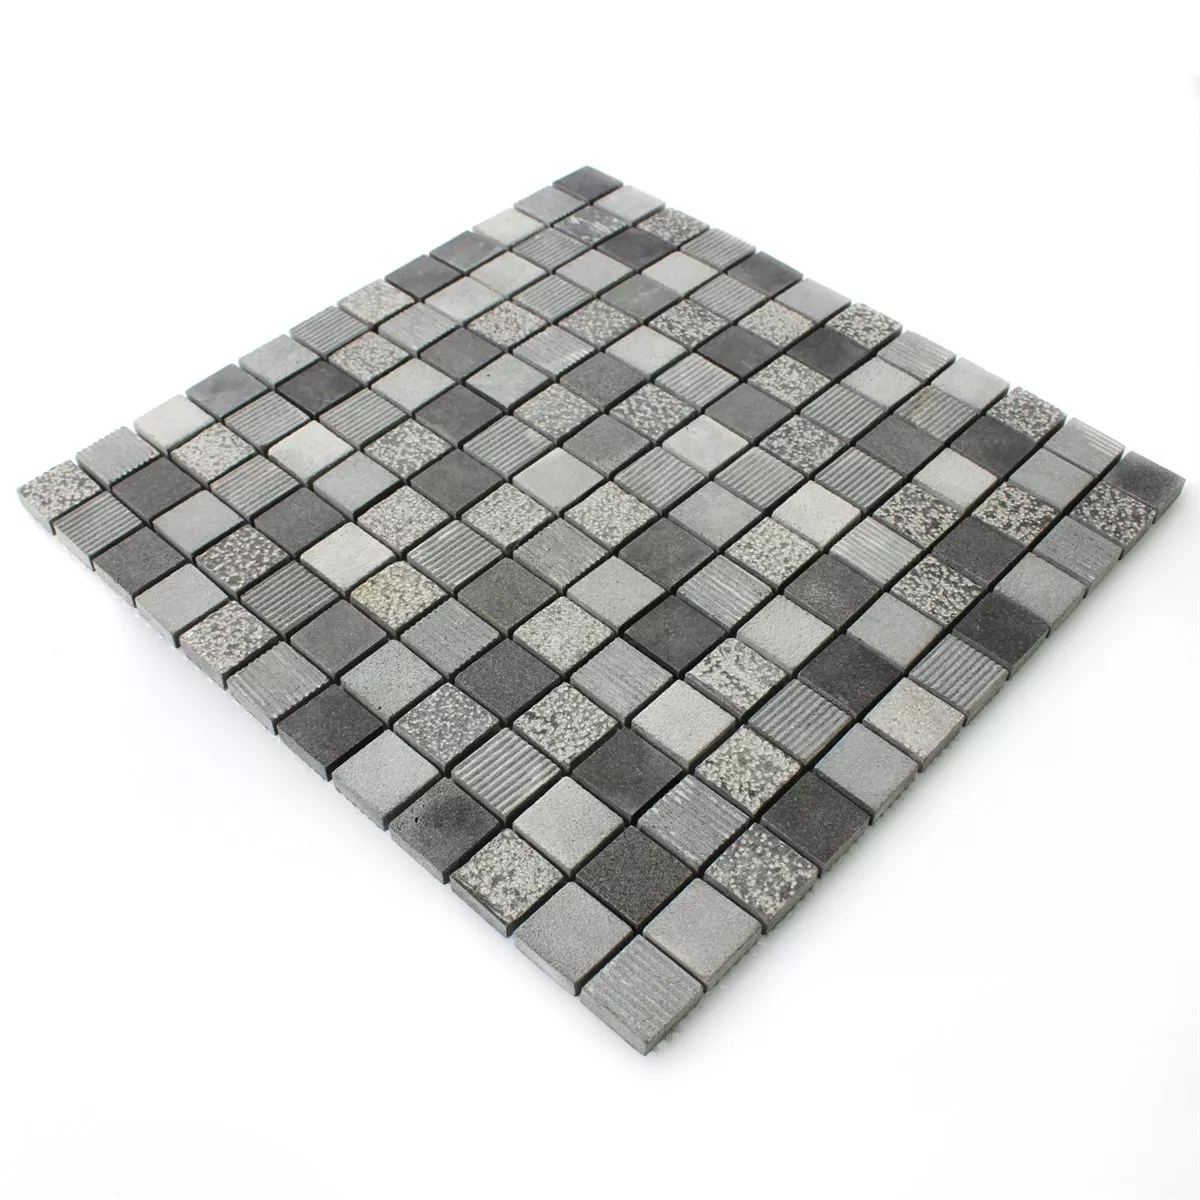 Sample Mosaic Tiles Natural Stone Notte Anthracite